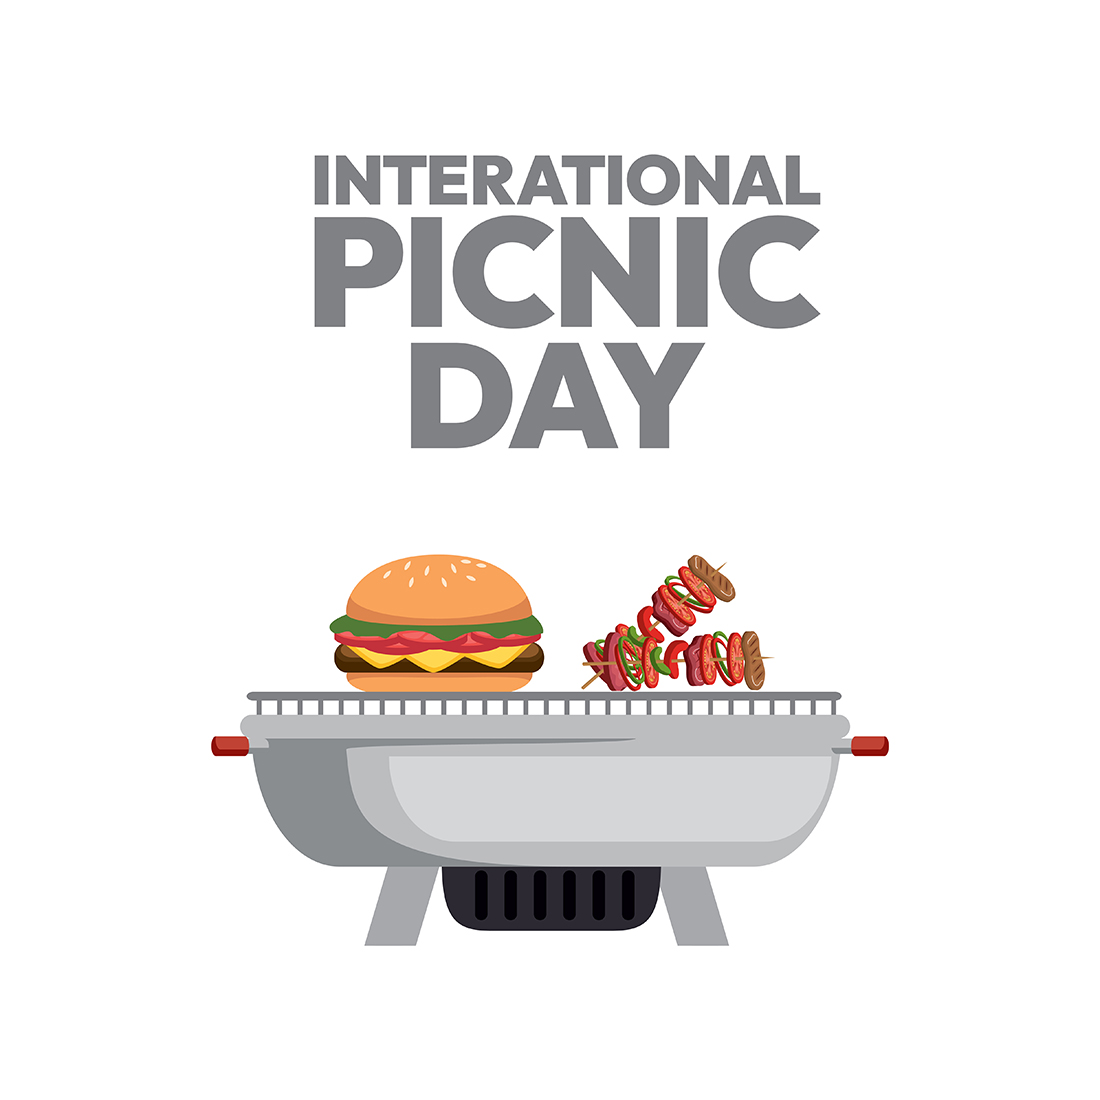 International picnic day preview image.